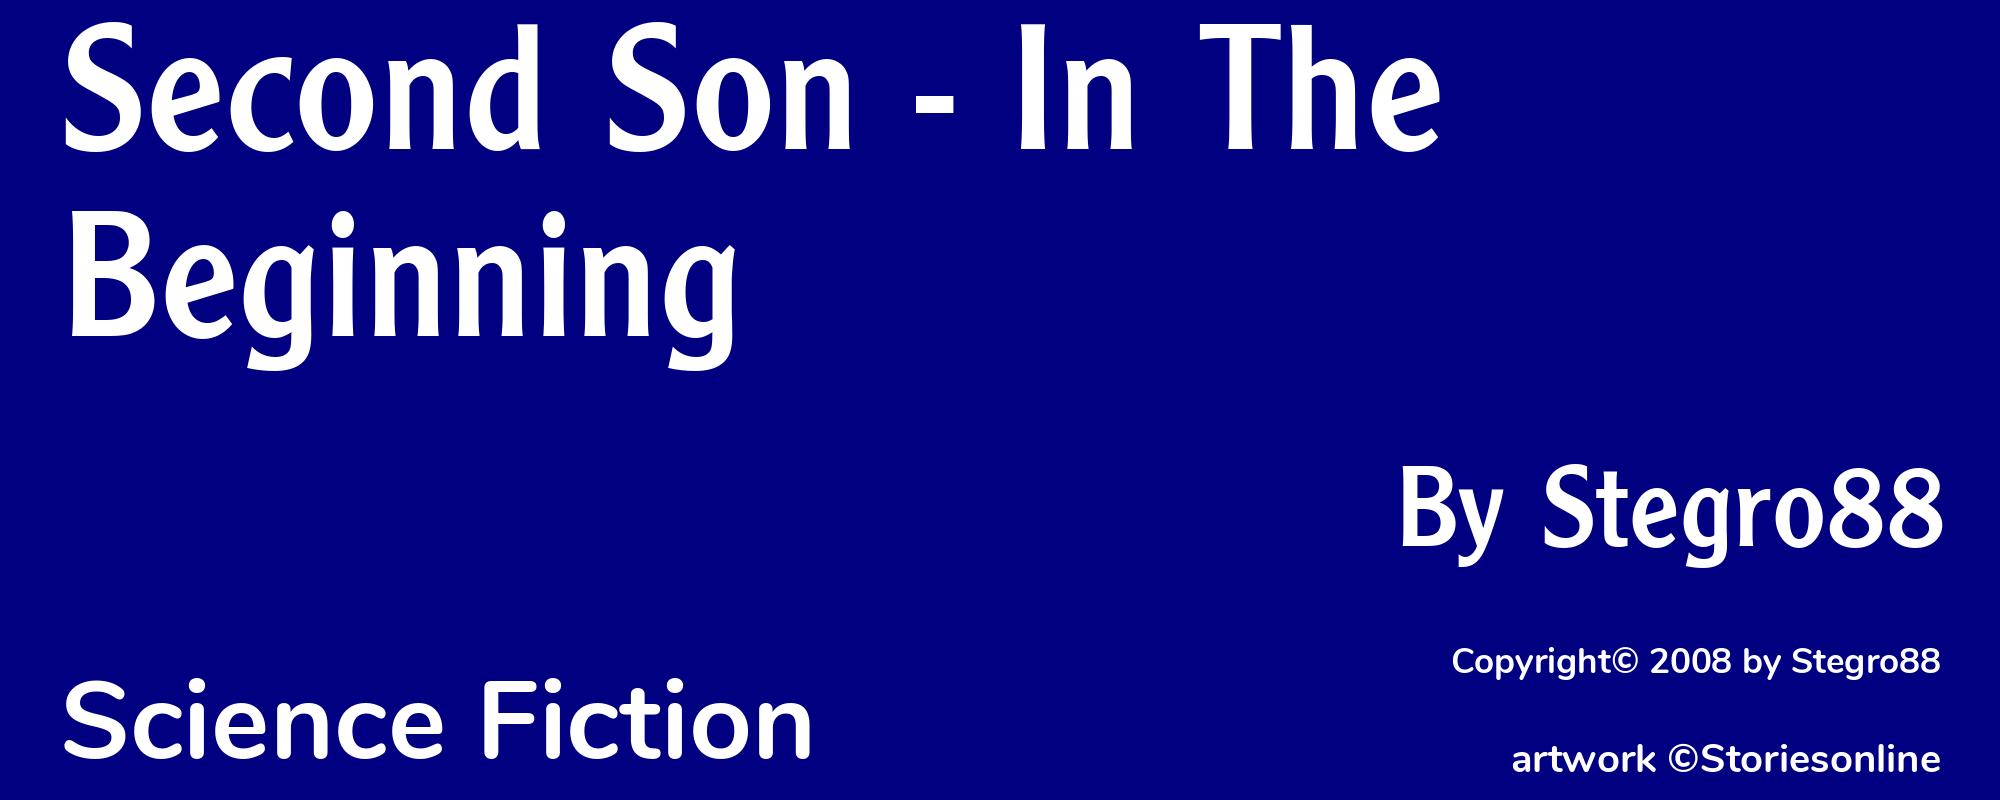 Second Son - In The Beginning - Cover